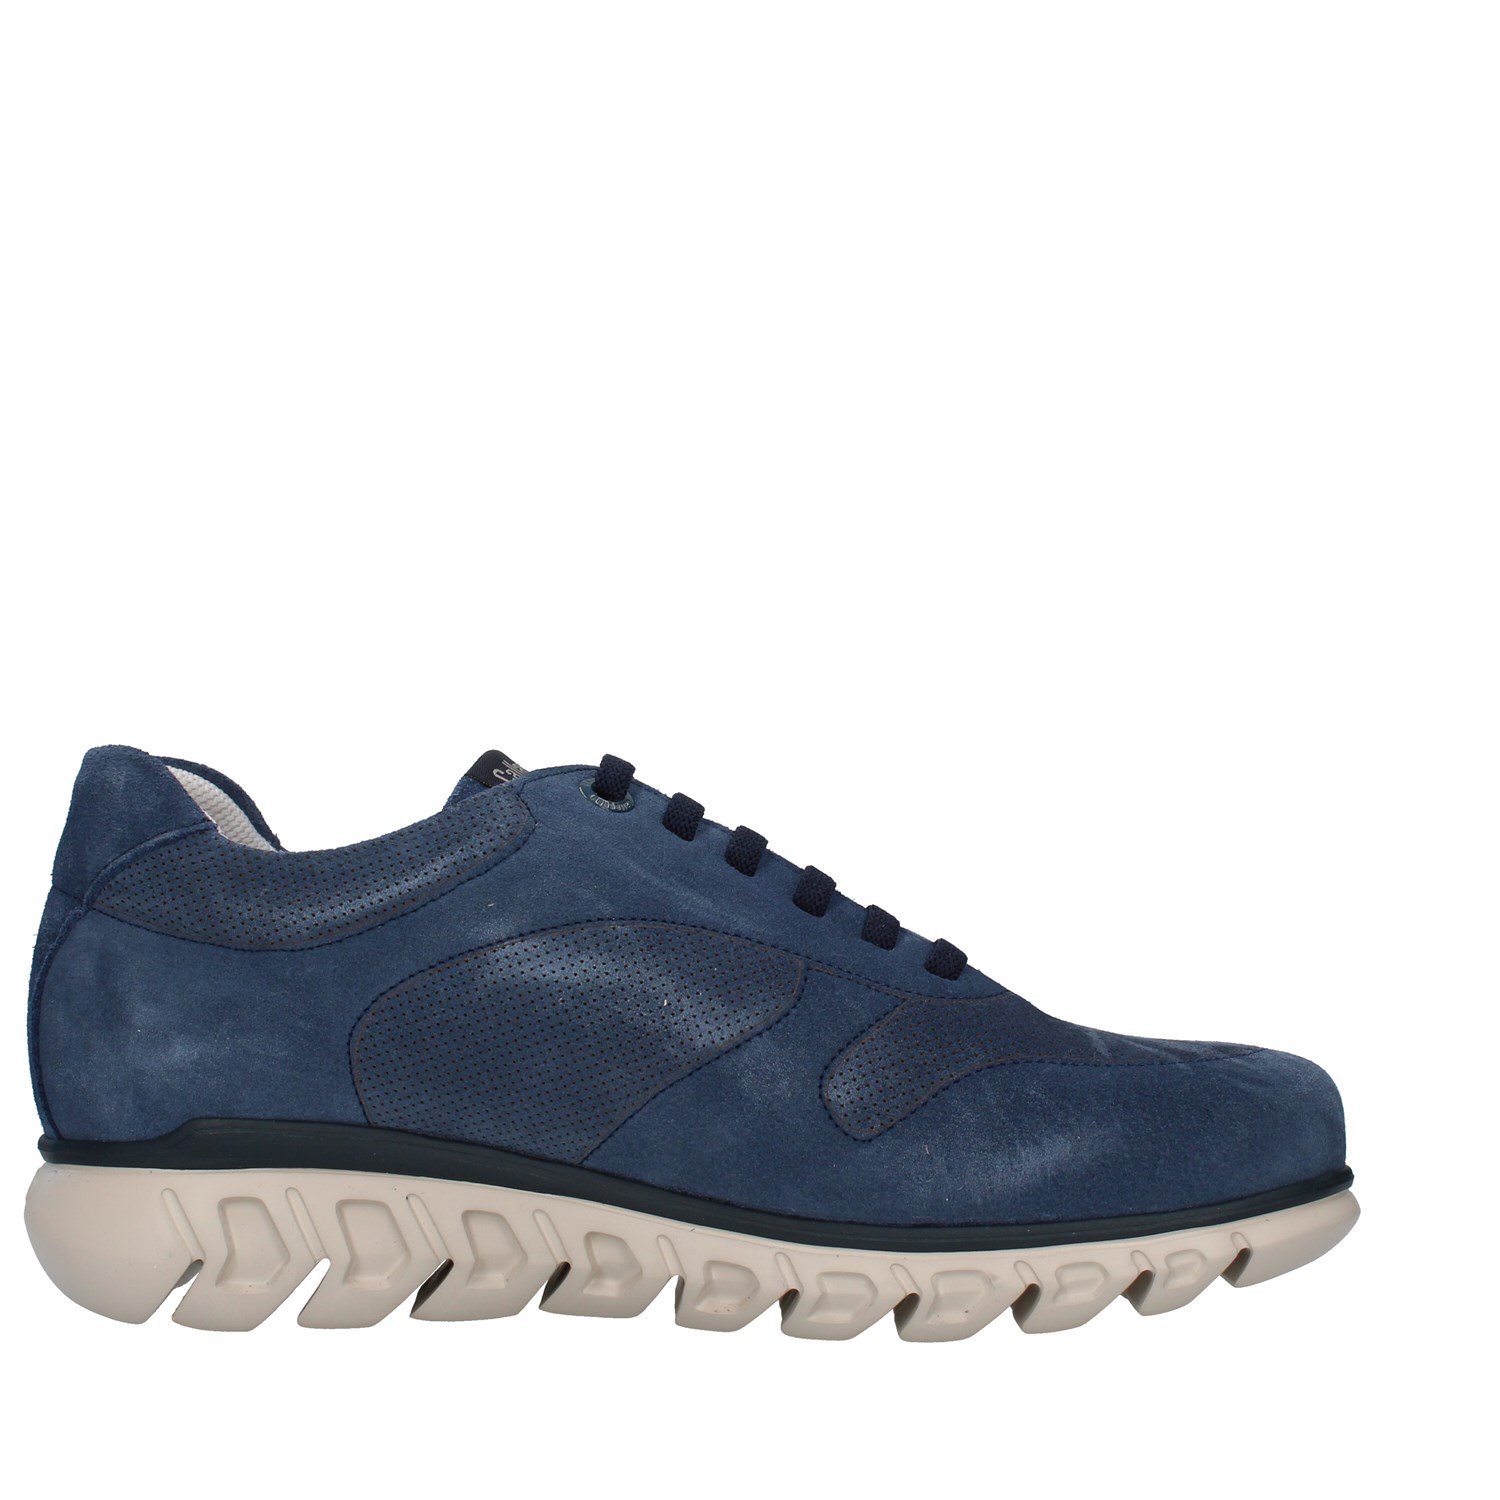 Callaghan Shoes Man low BLUE 12916